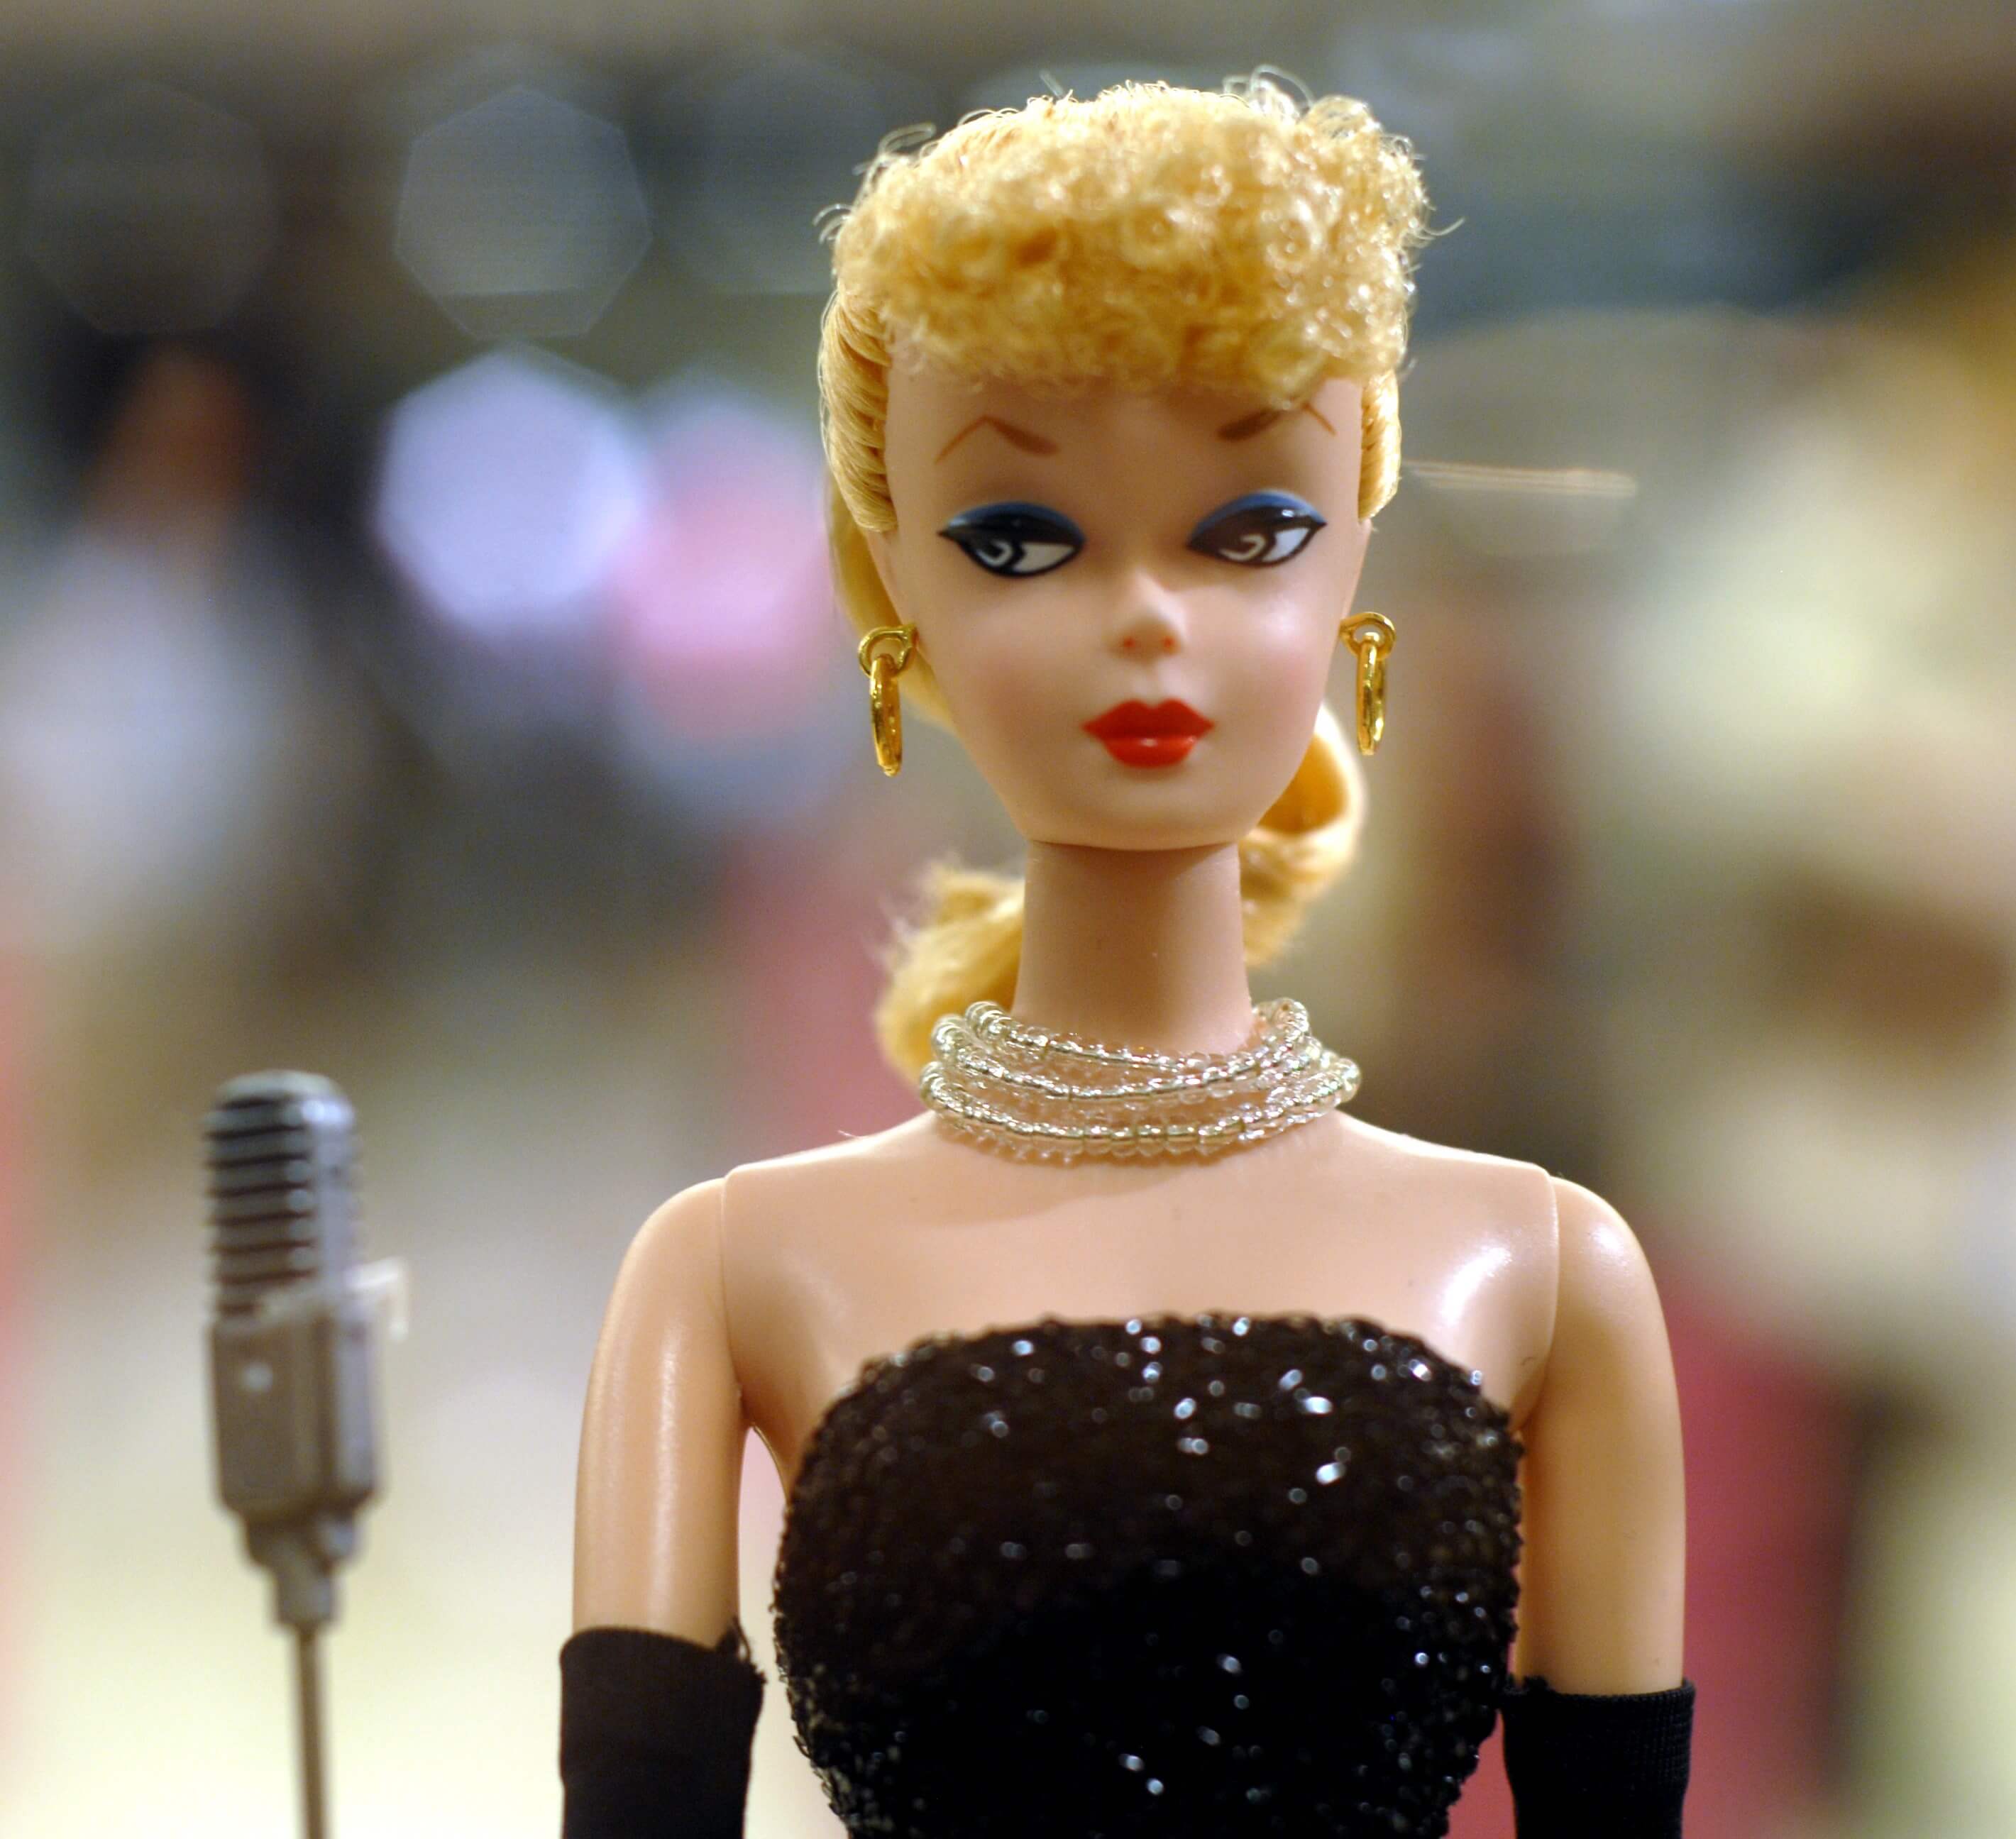 Barbie, the star of the movie 'Barbie', with a microphone